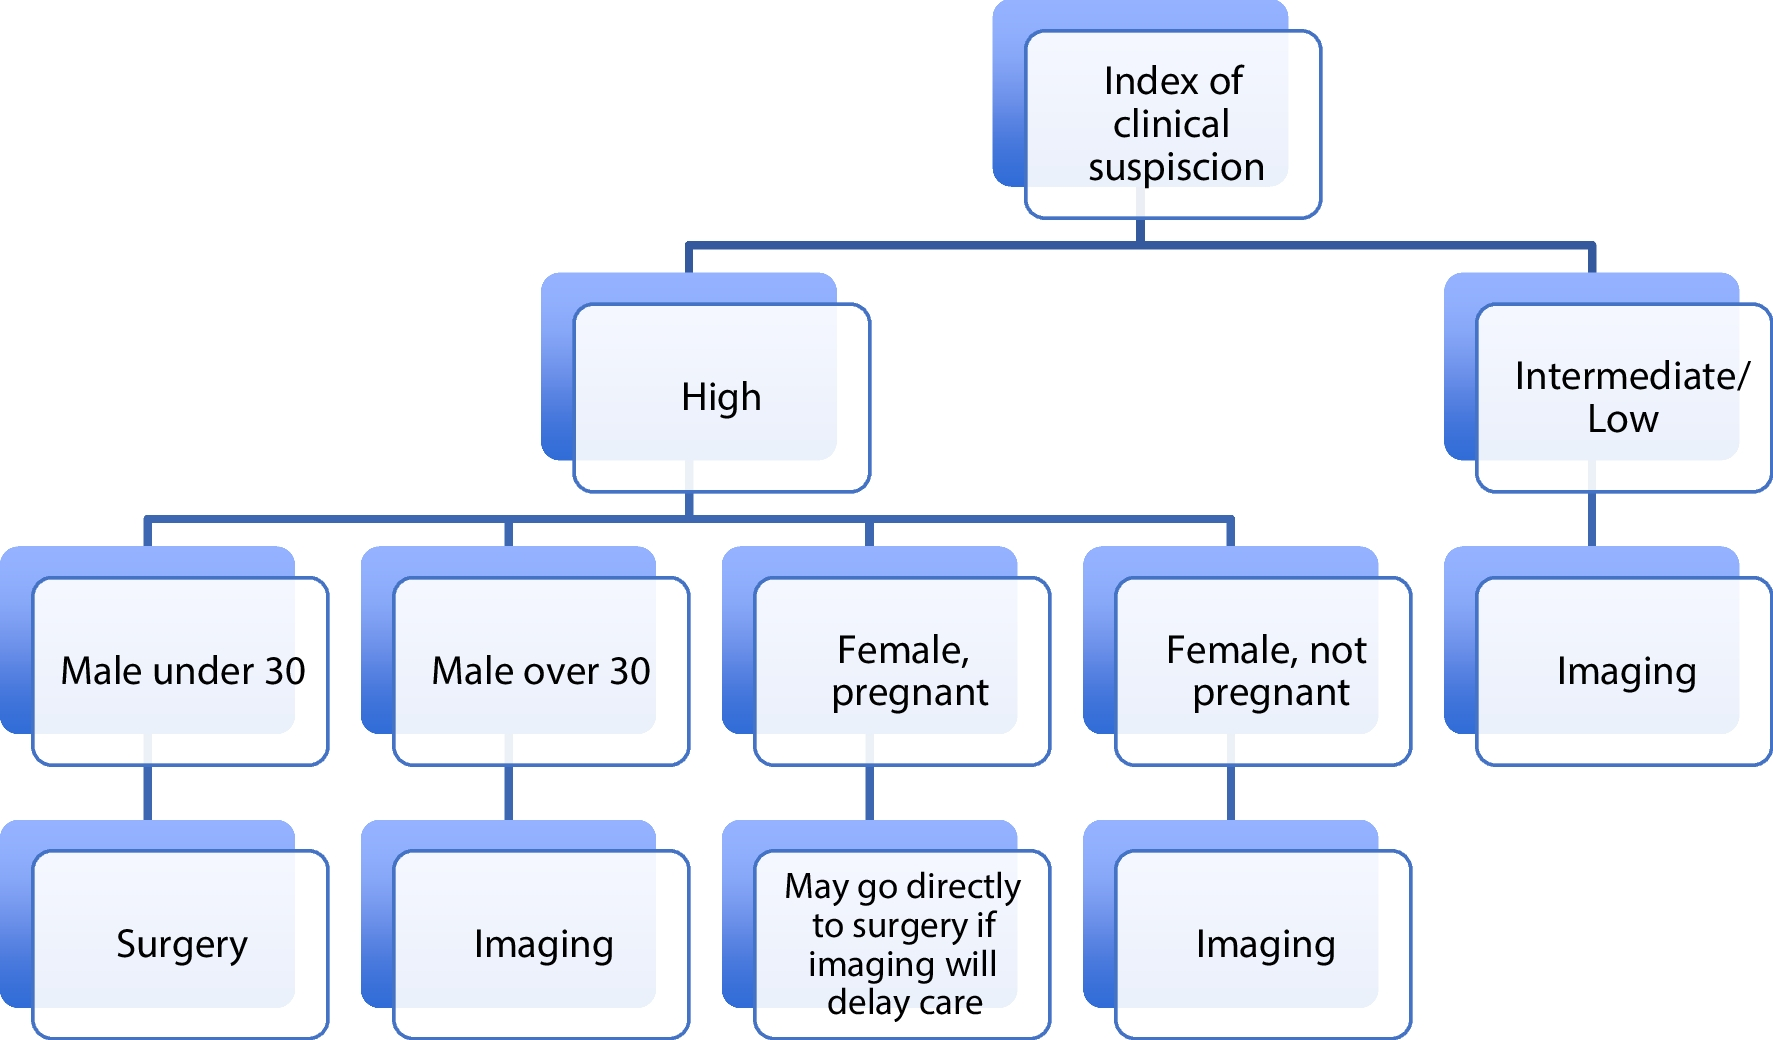 “Rule out appendicitis”: a Canadian emergency radiology perspective on medicolegal risks, imaging pitfalls, and strategies to improve care